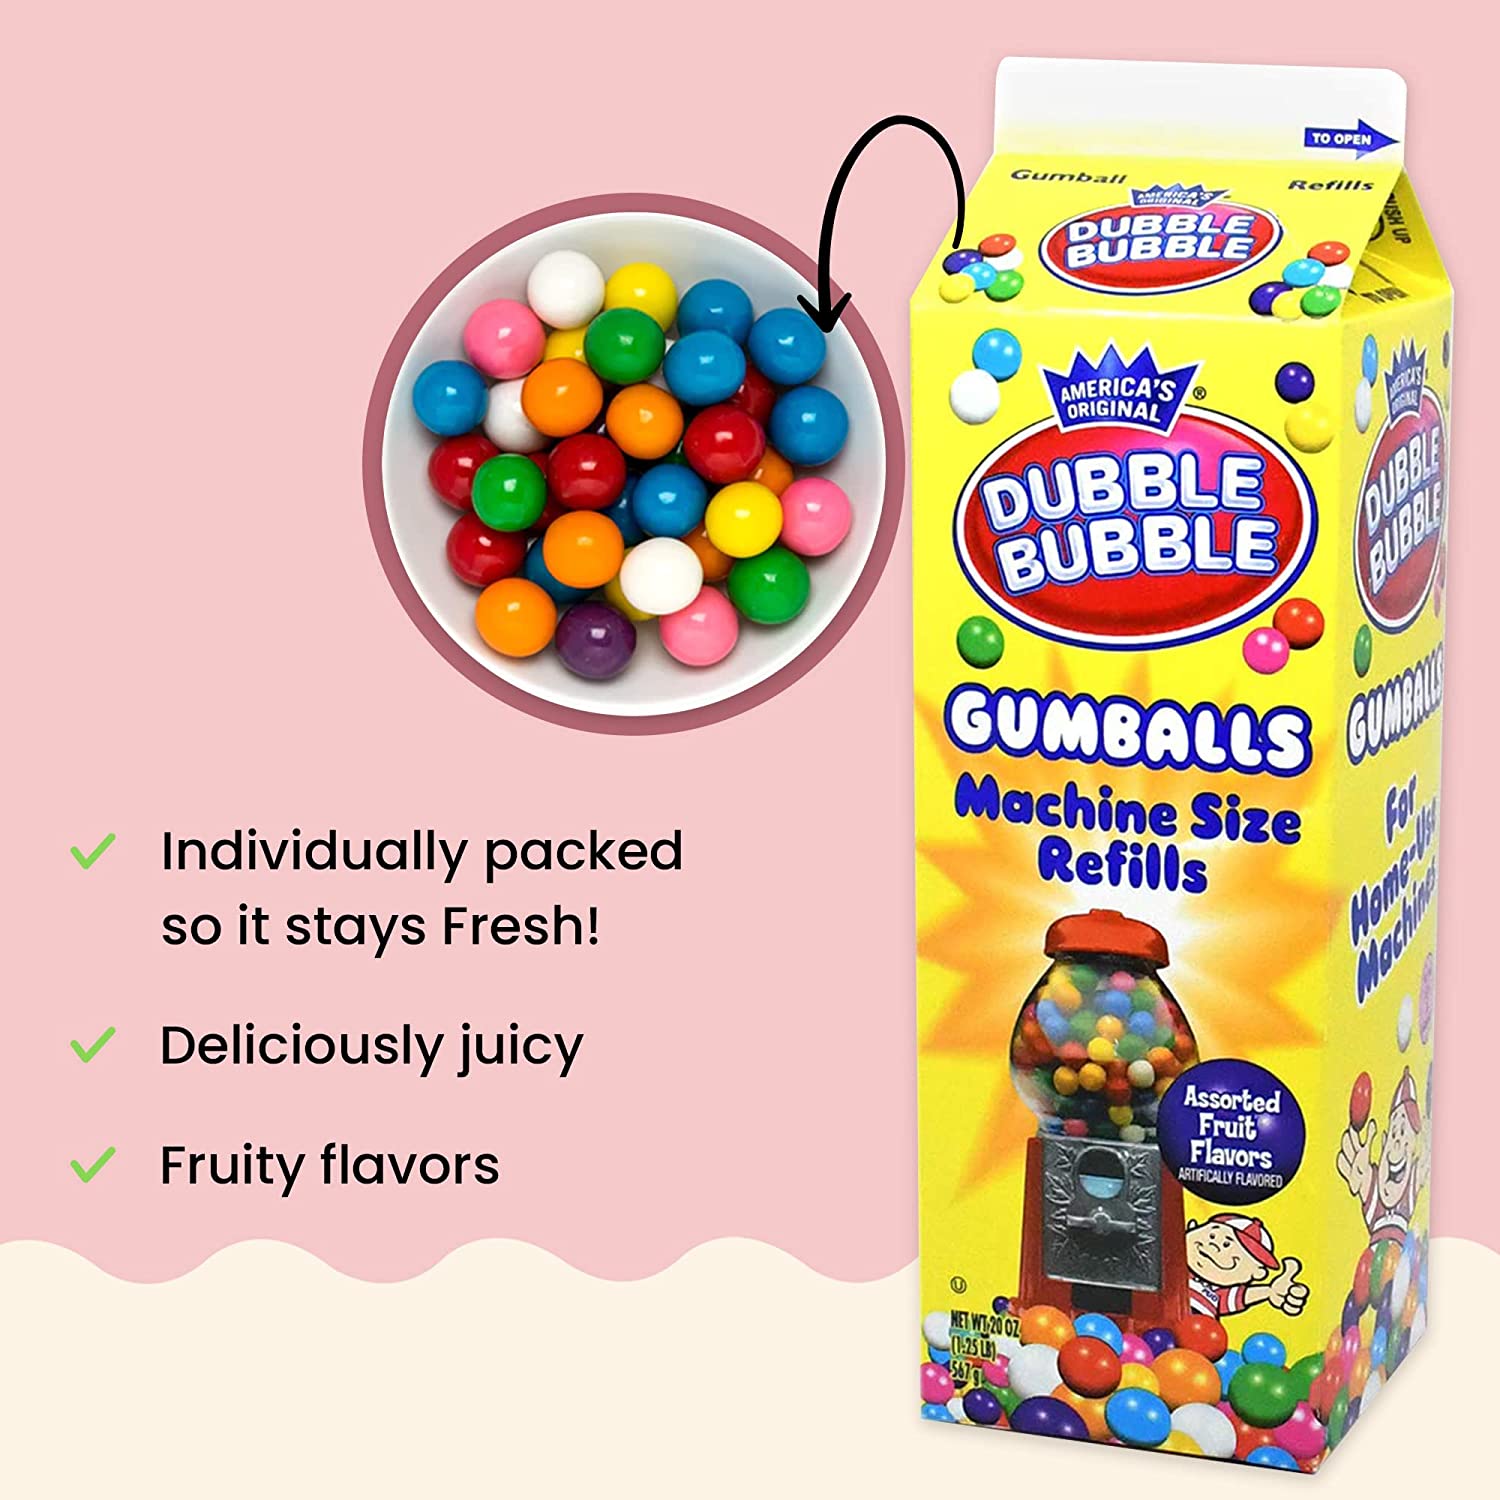 Charms-Dubble Bubble Gumballs Refill for Machines 20 oz. Box--Legacy Toys